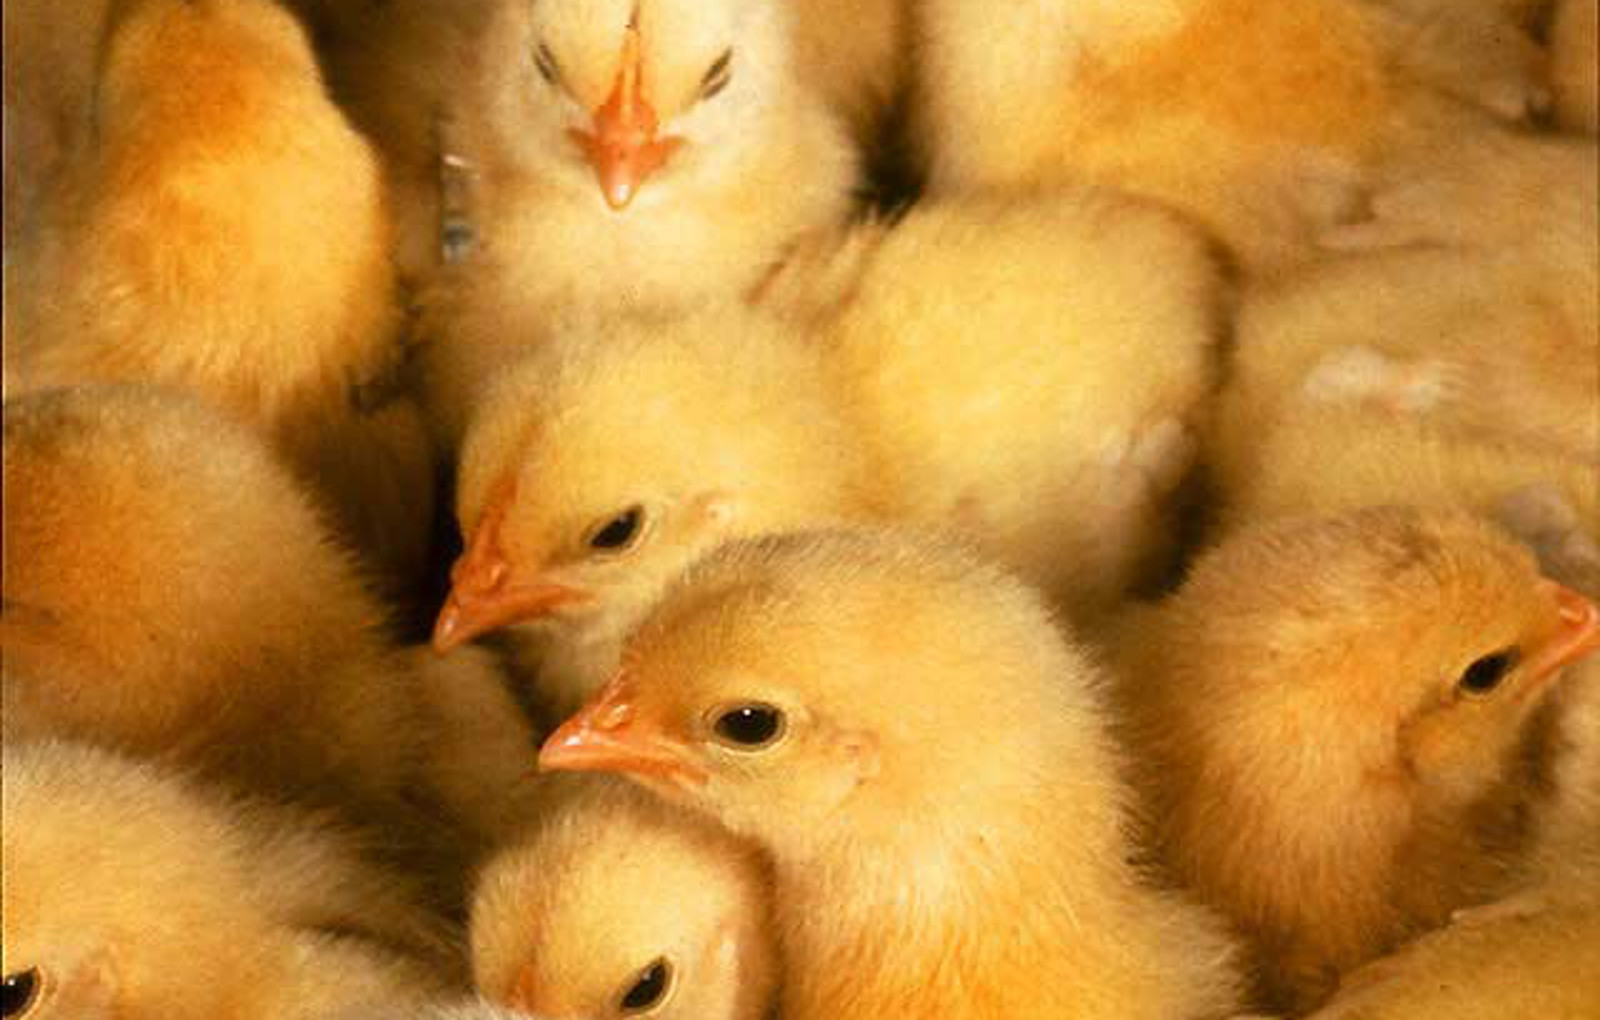 Welfare Concerns for Transporting Day Old Chicks